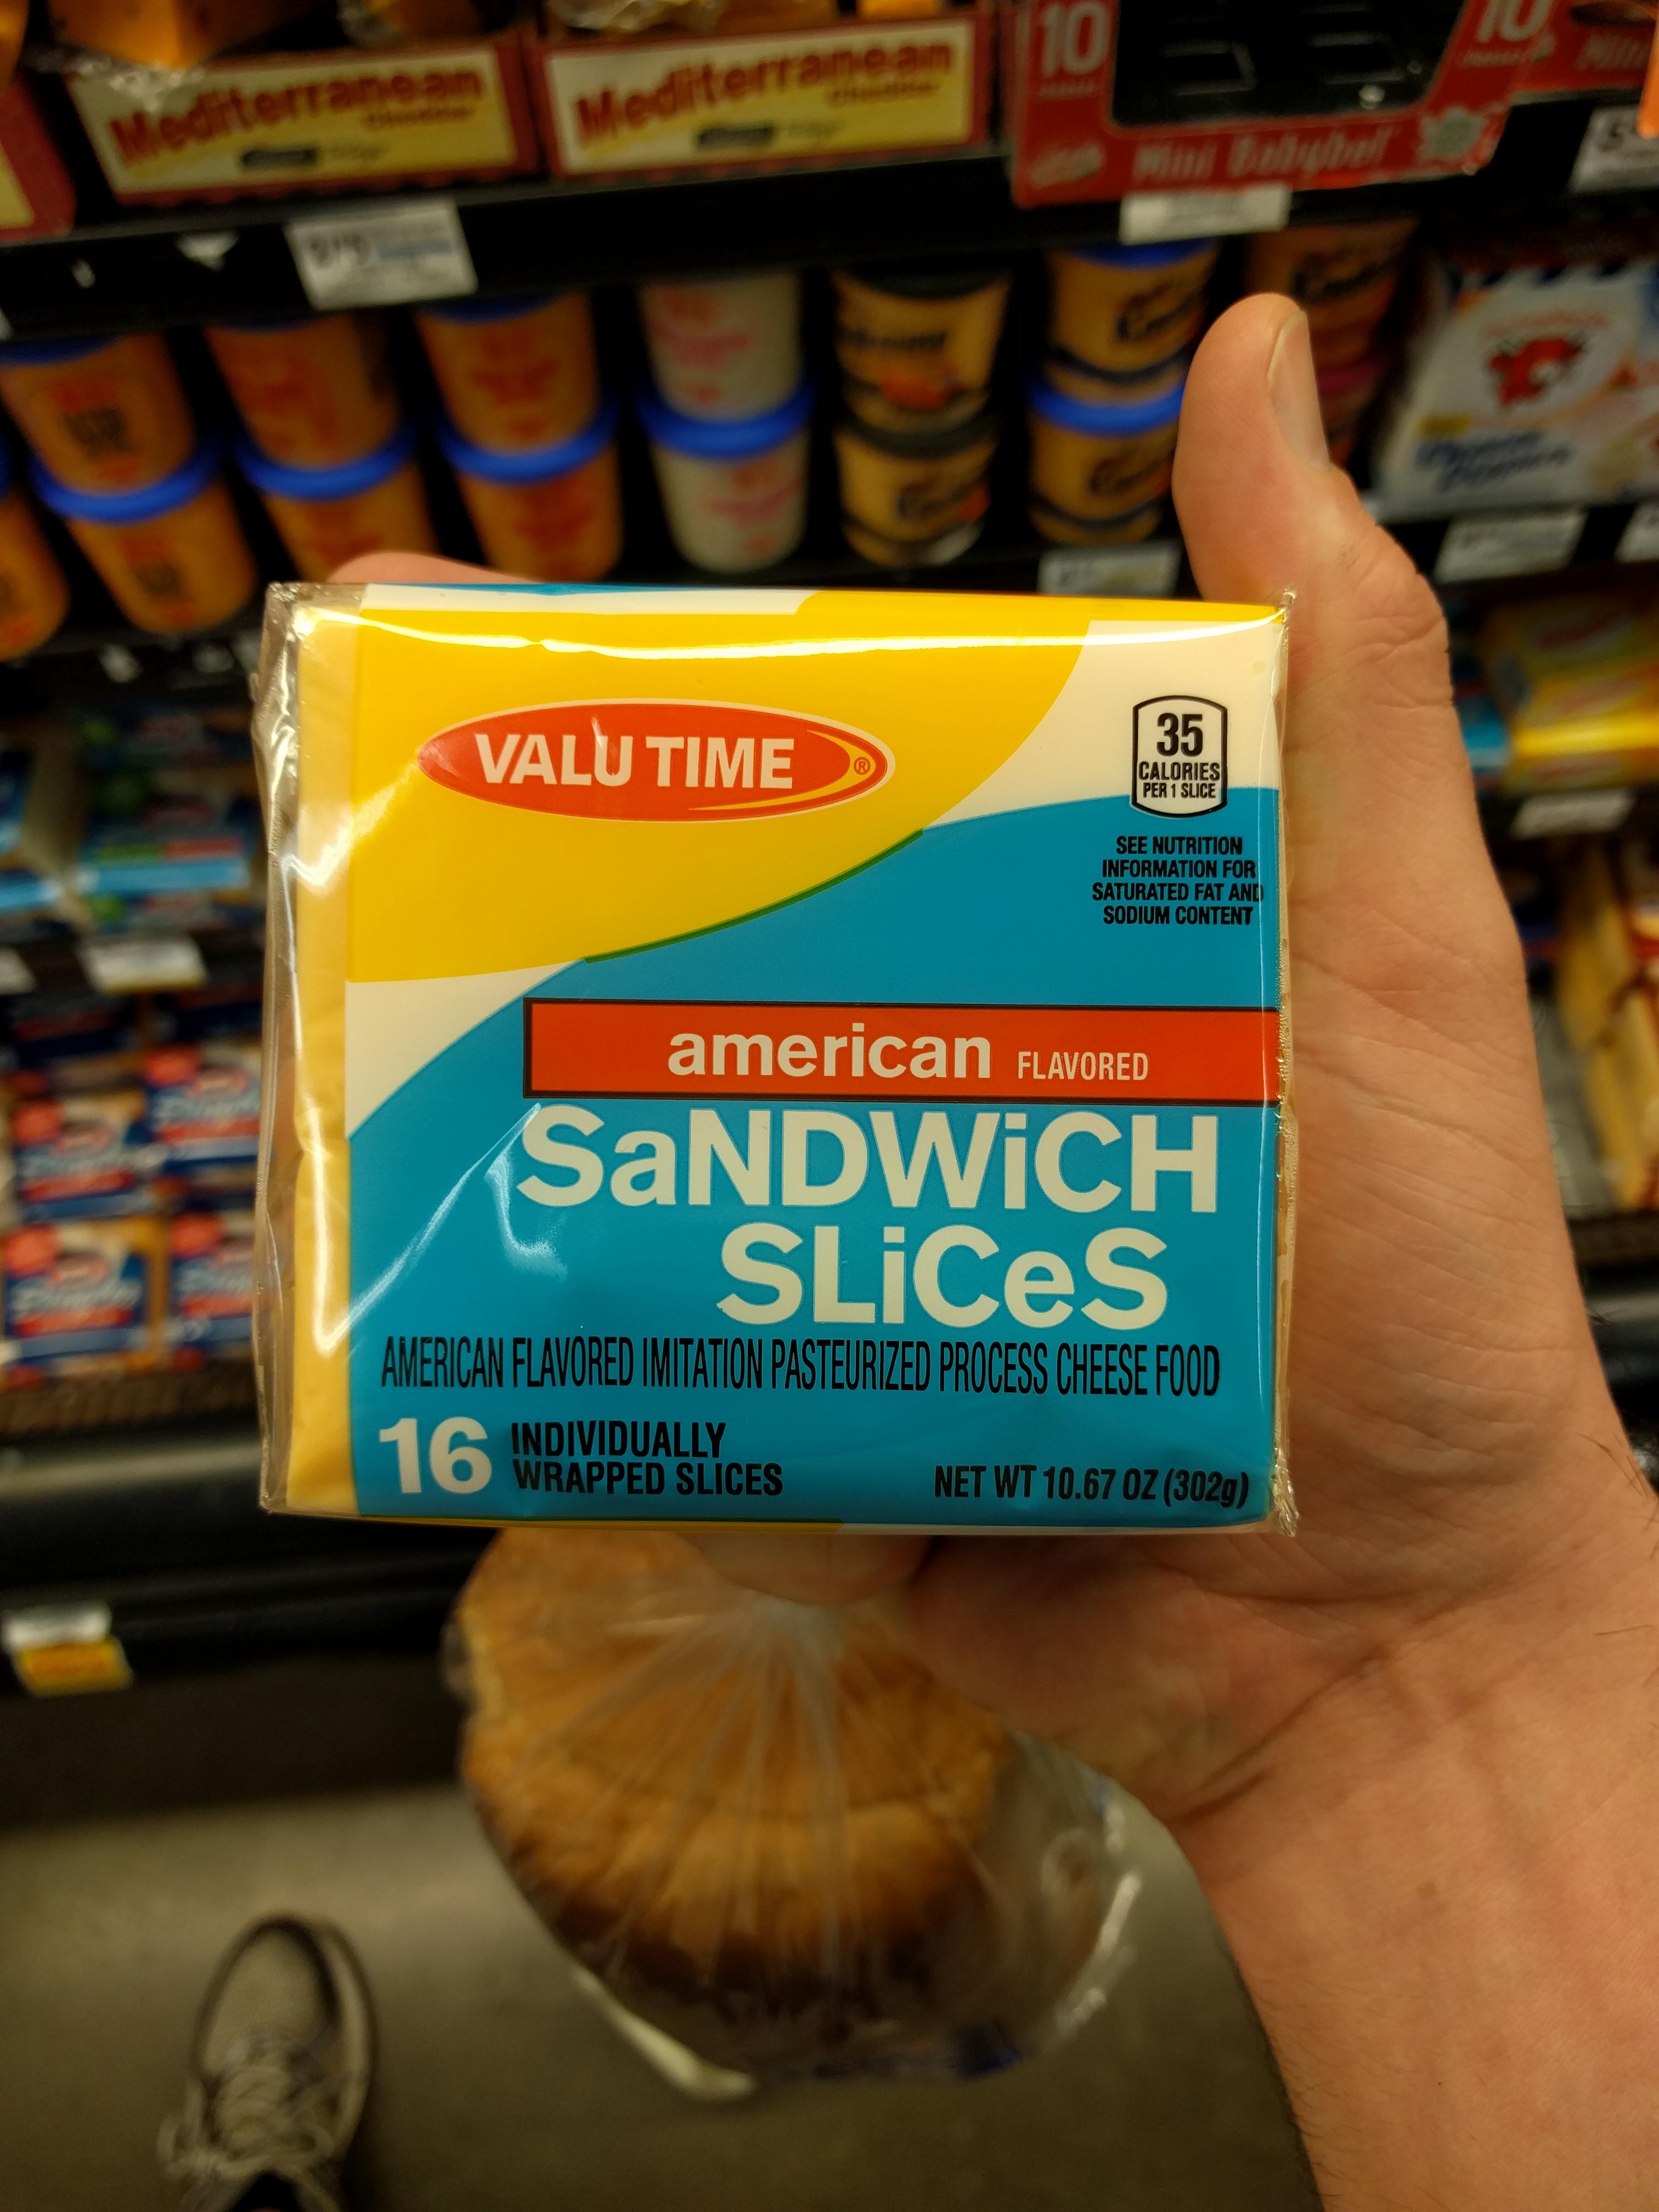 American Flavored Imitation Pasteurized Process Cheese Food…Hopefully You Are Not Putting This Shit In Your Body.